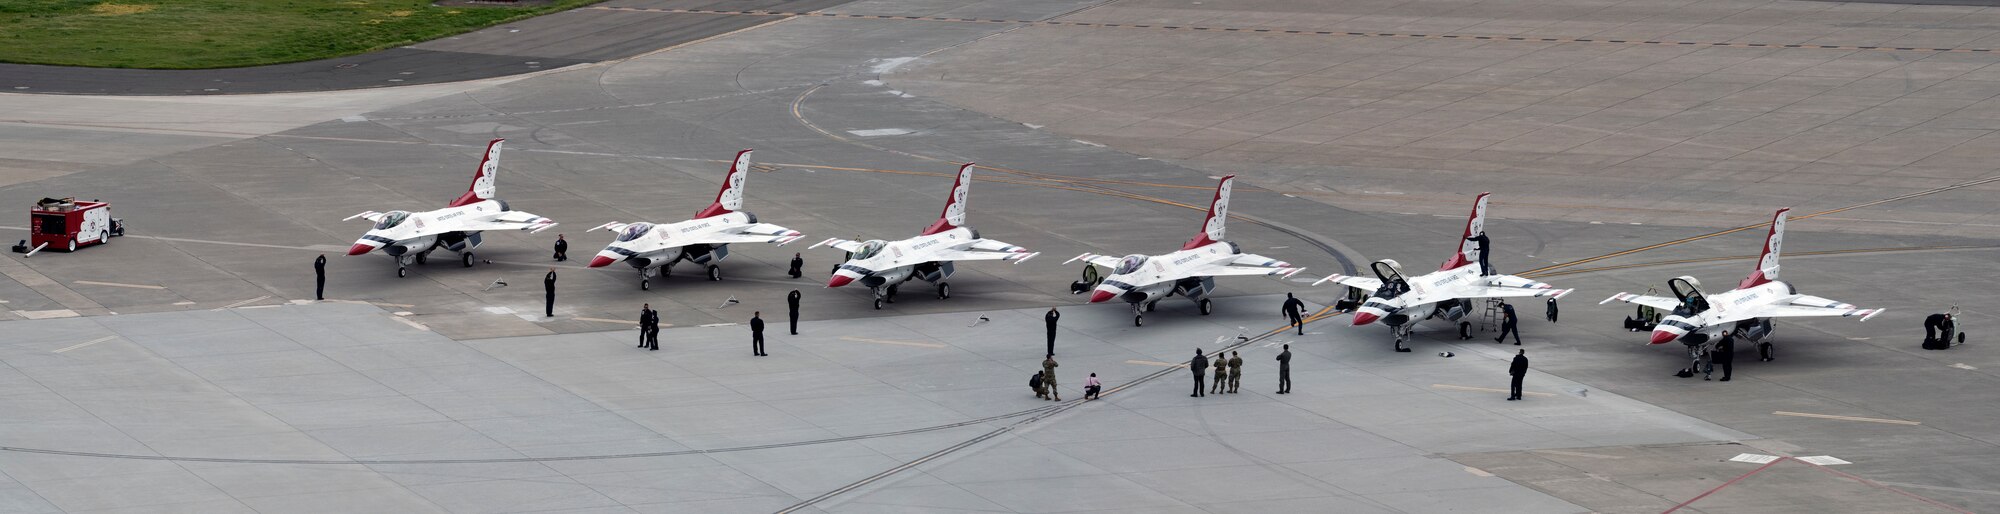 The U.S. Air Force Thunderbirds demonstration team arrive for the “Thunder Over the Bay” Air Show at Travis Air Force Base, California, March 30 - 31, 2019. In addition to the U.S. Air Force Thunderbirds aerial demonstration team, the two-day event will feature performances by the U.S. Army Golden Knights parachute team, flyovers, and static displays. The event honored hometown heroes like police officers, firefighters, nurses, teachers and ordinary citizens whose selfless work made their communities safer and enhanced the quality of life. (U.S. Air Force photo by David Cushman)